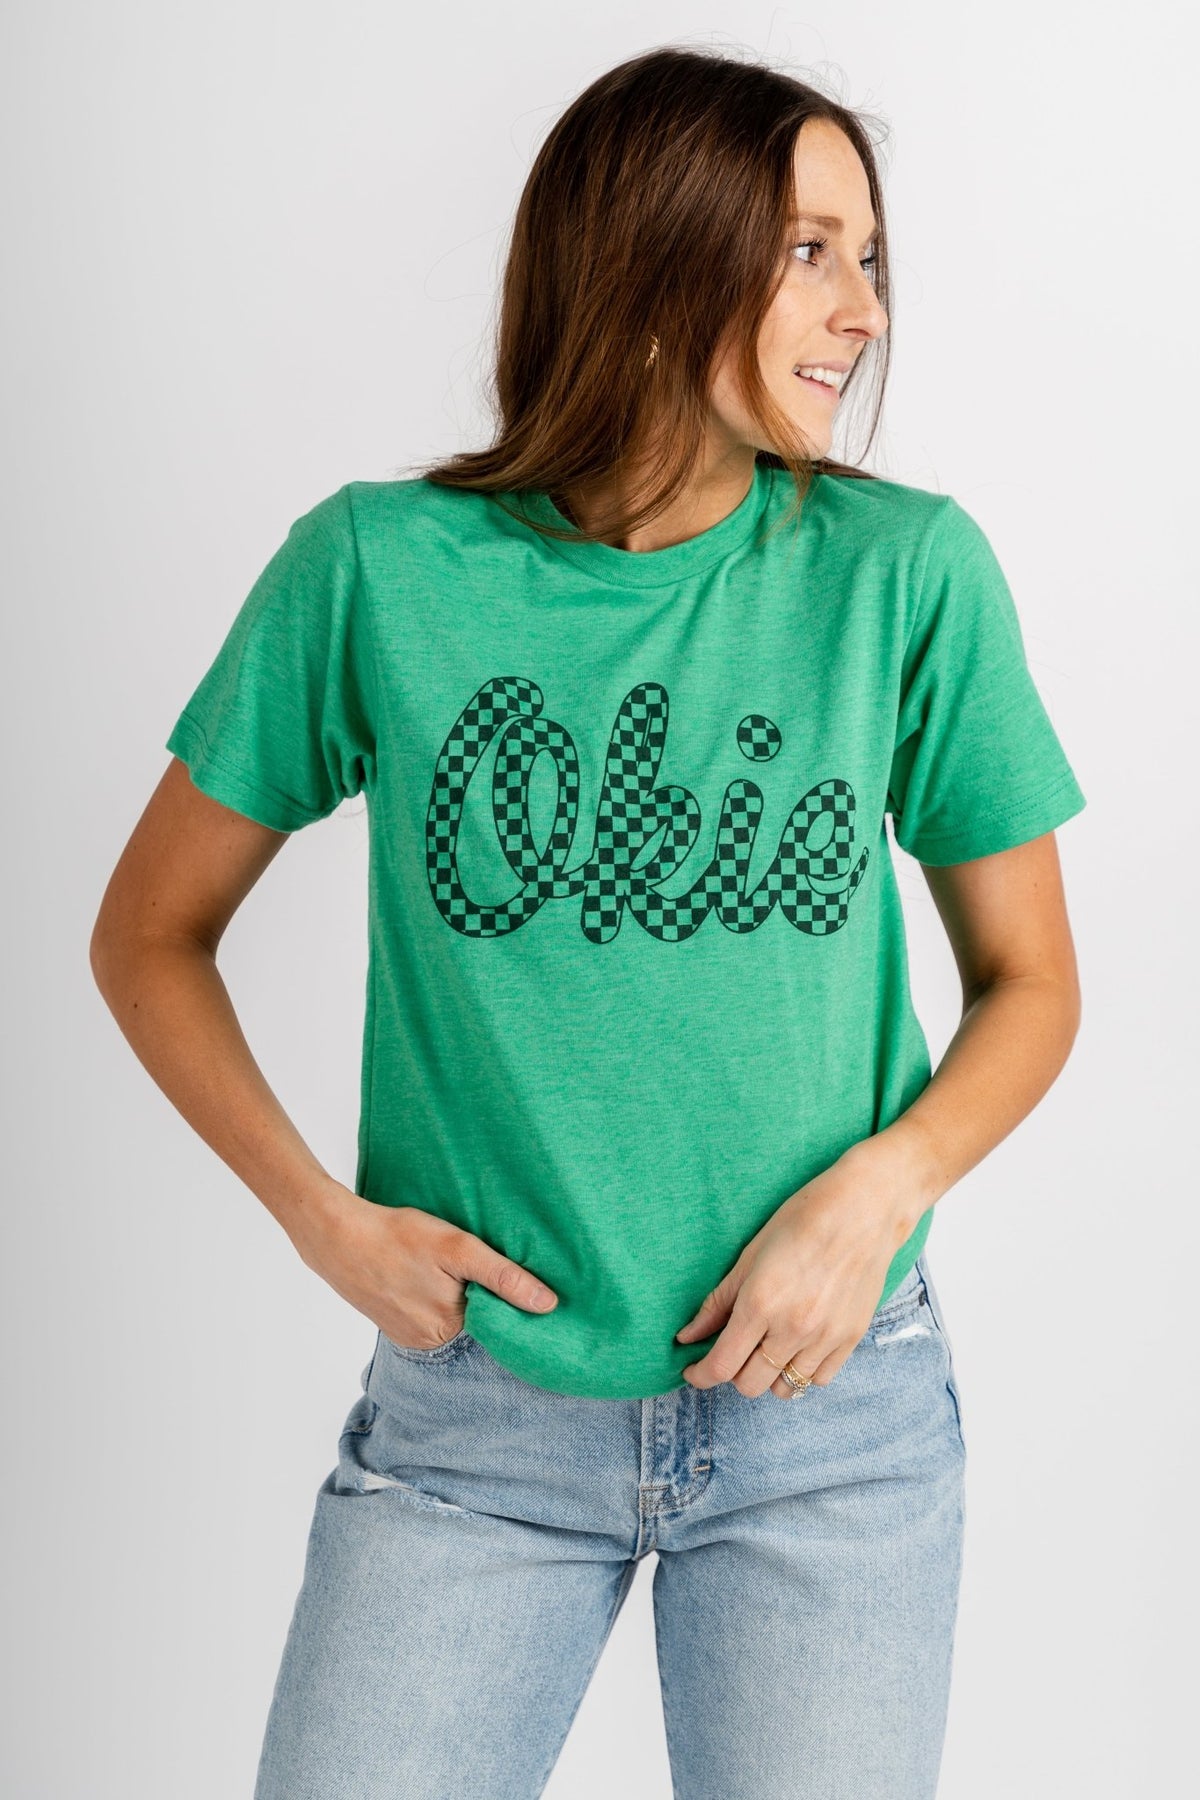 Okie checkered t-shirt green - Trendy T-Shirts for St. Patrick's Day at Lush Fashion Lounge Boutique in Oklahoma City